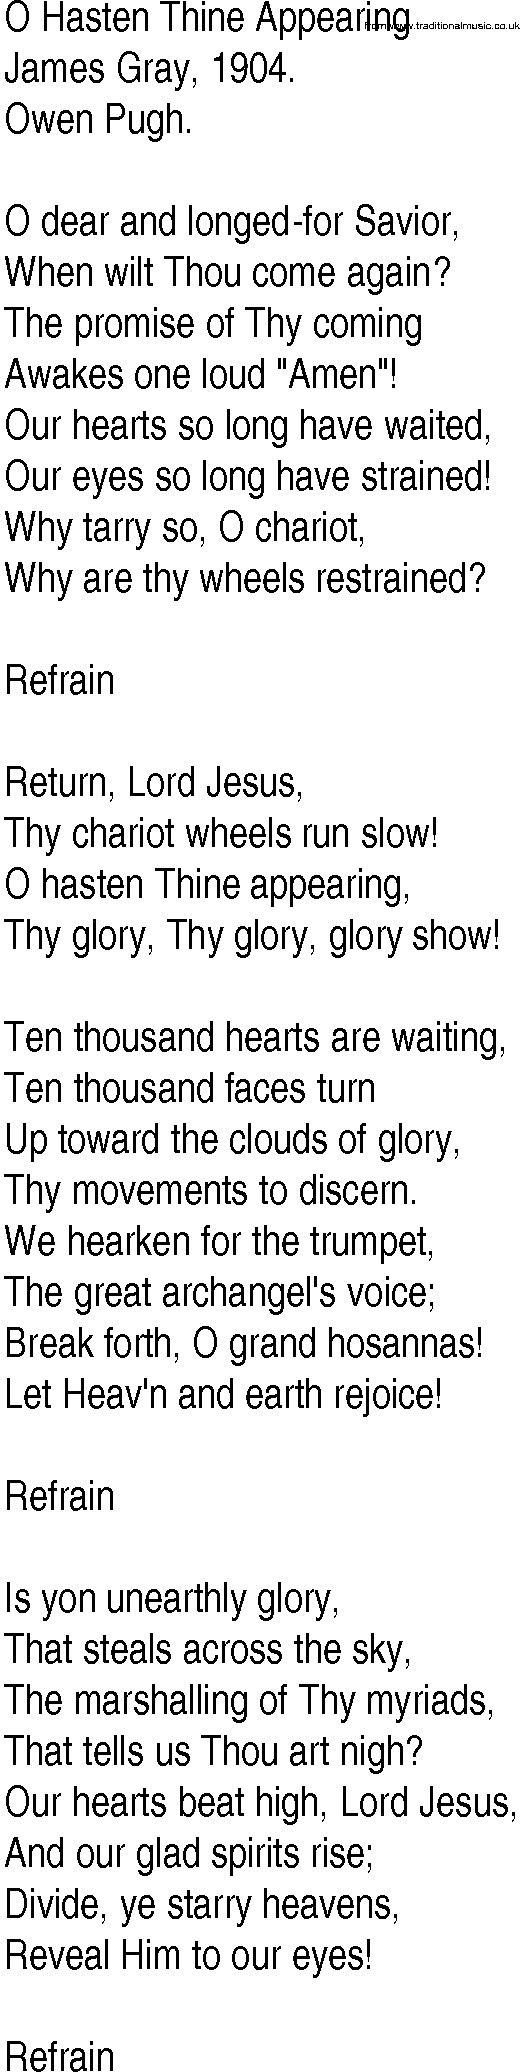 Hymn and Gospel Song: O Hasten Thine Appearing by James Gray lyrics